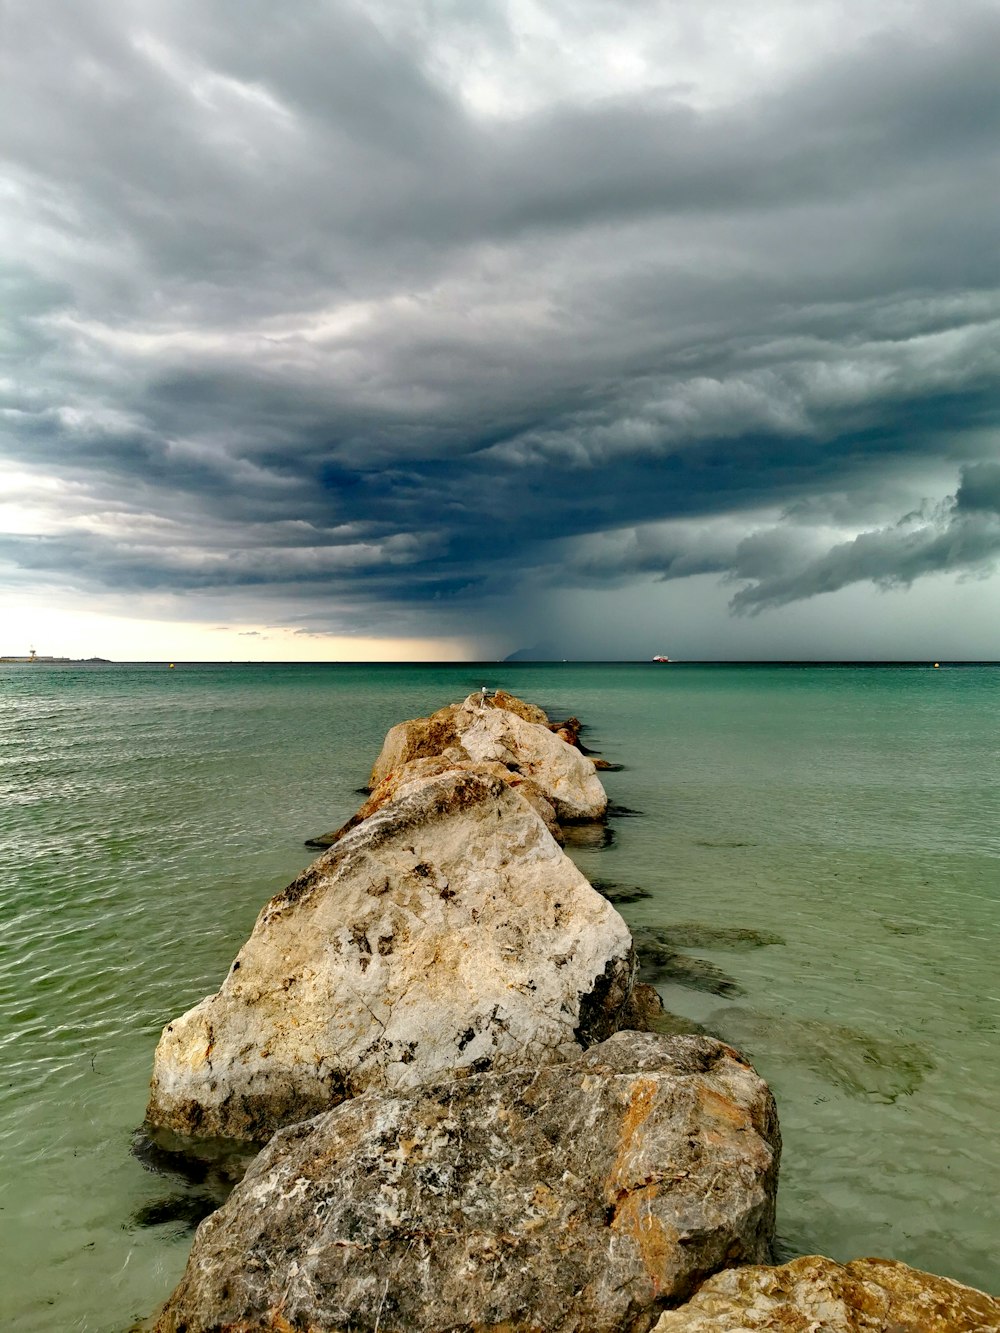 brown rock formation on sea under cloudy sky during daytime